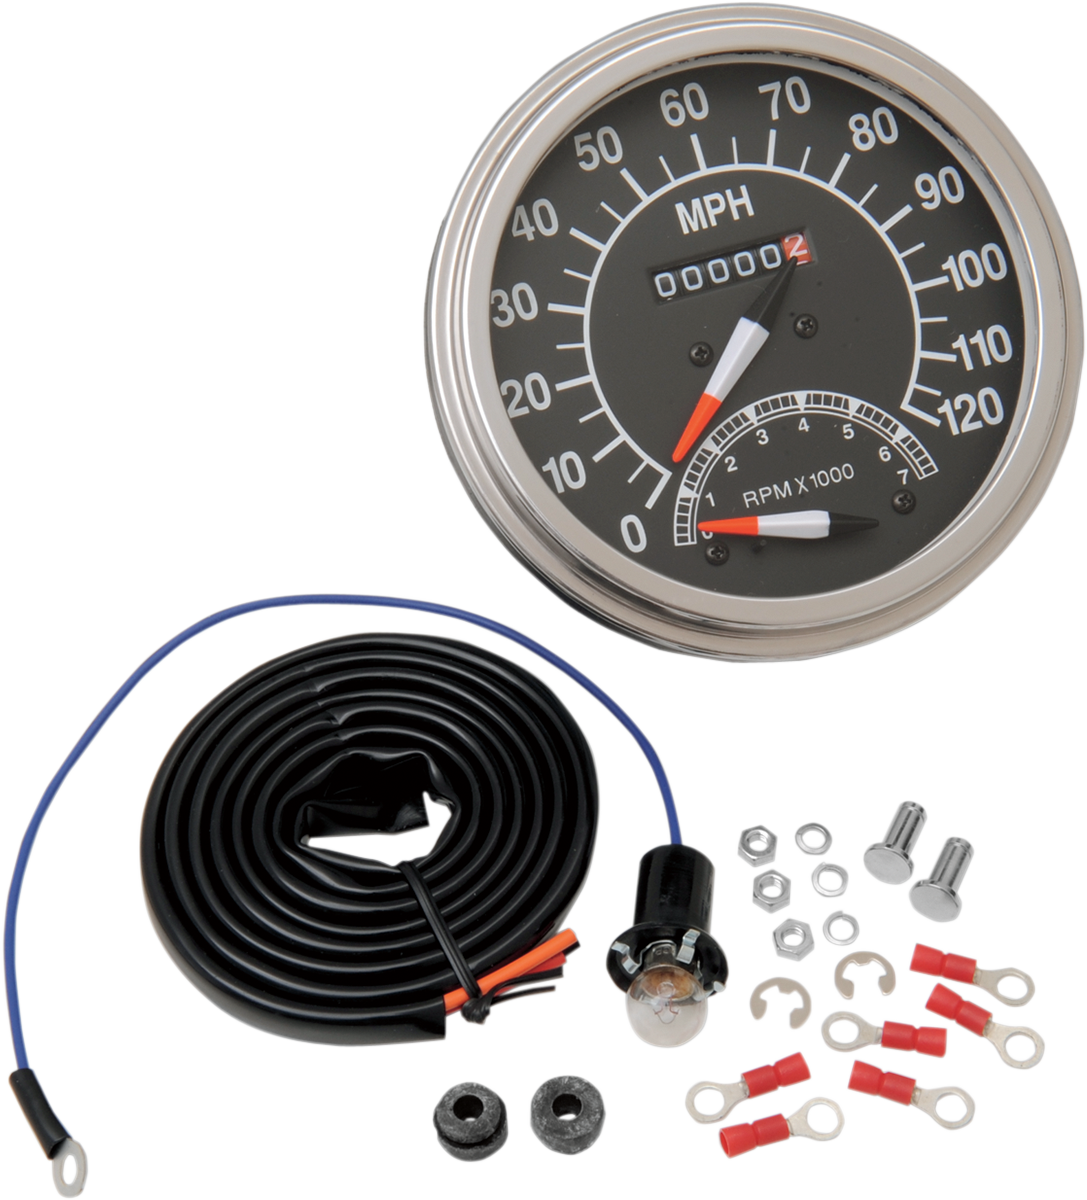 DRAG SPECIALTIES 5" MPH FL-Style 2:1 Speedometer with Tach - '68-'84 Black Face NO RESET KNOB 72418M